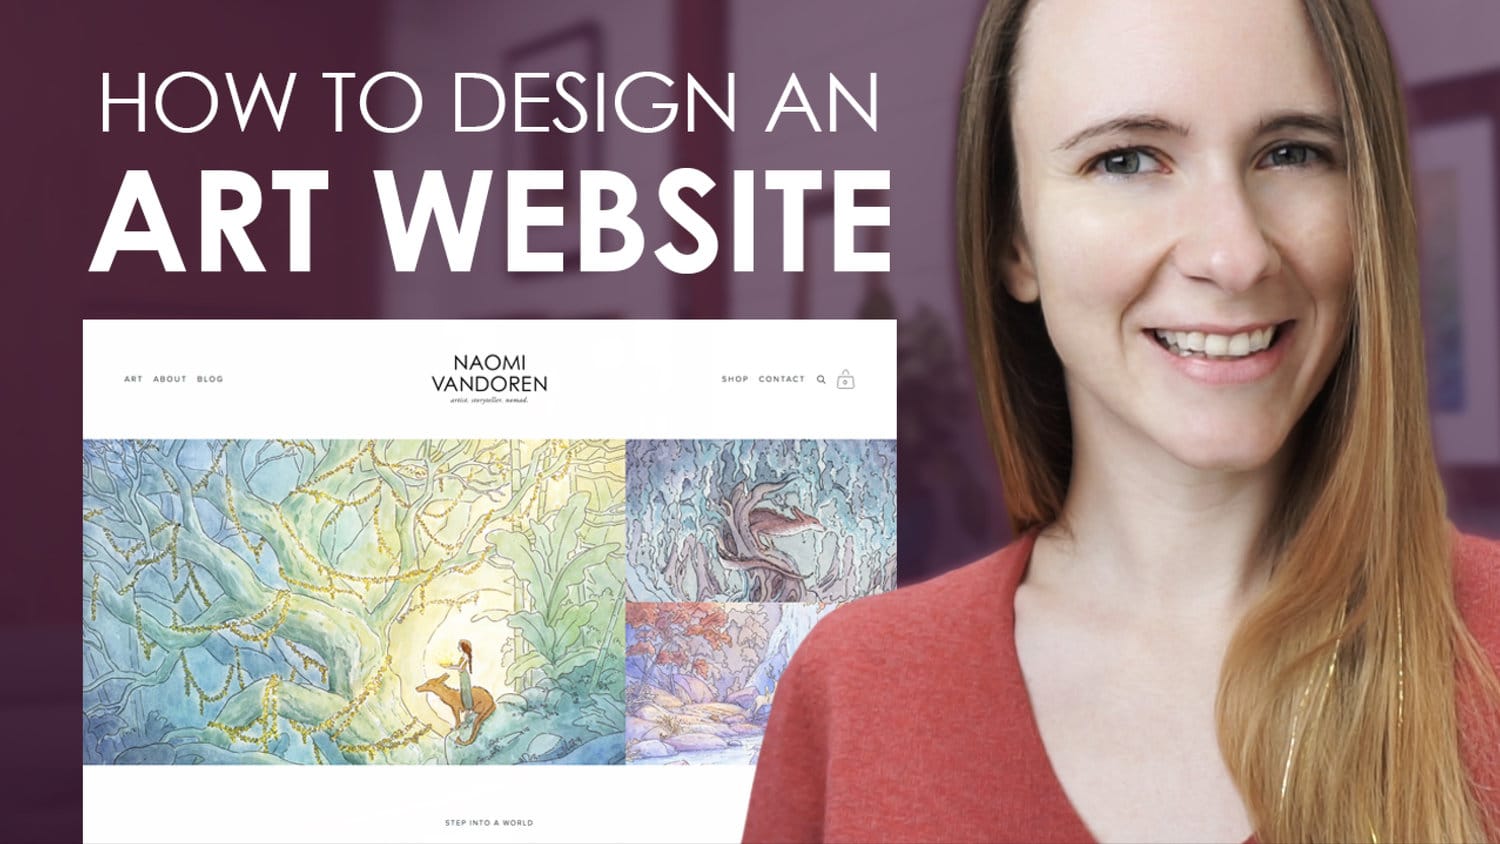 What should an artist website include?